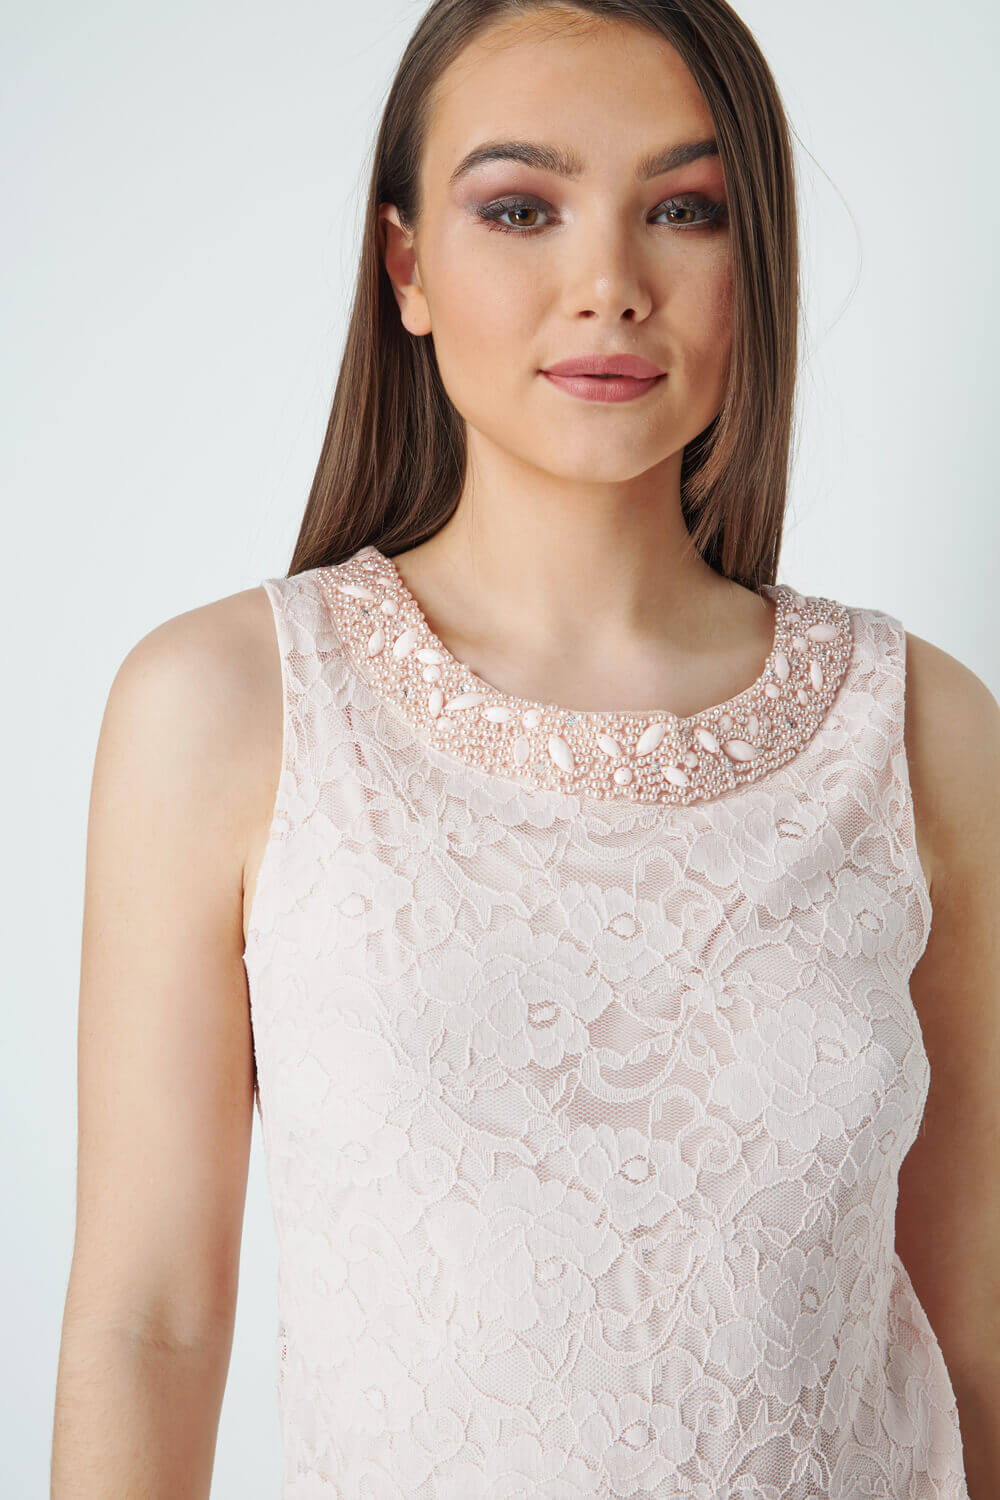 PINK Embellished Lace Shell Top, Image 4 of 9